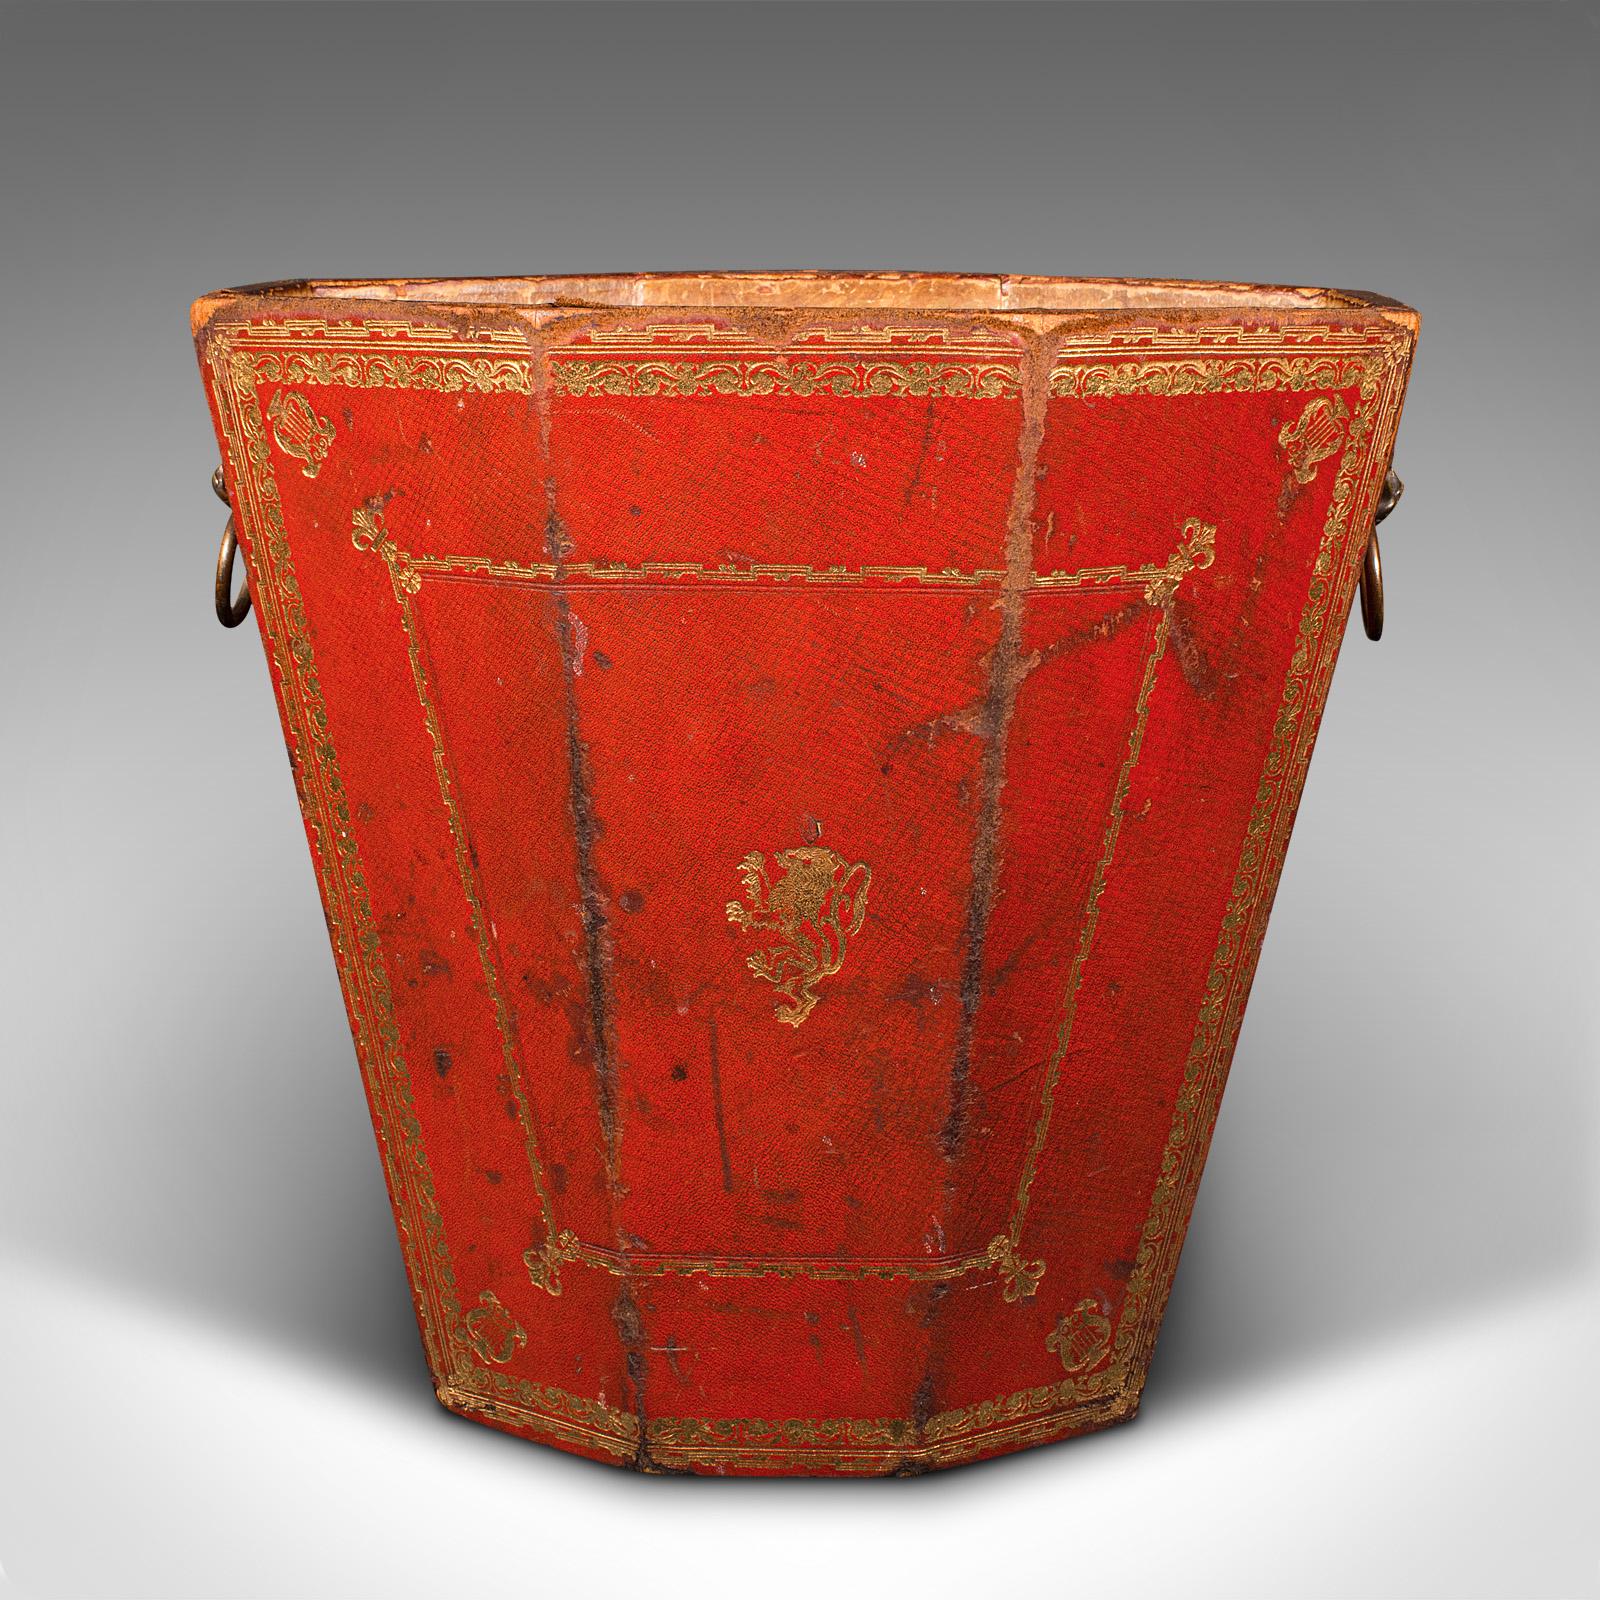 This is an antique drawing room paper bin. An English, aged leather and brass office basket, dating to the Georgian period, circa 1800.

Beautifully aged bin, with great colour and charming detail
Displays a desirable, well aged patina commensurate